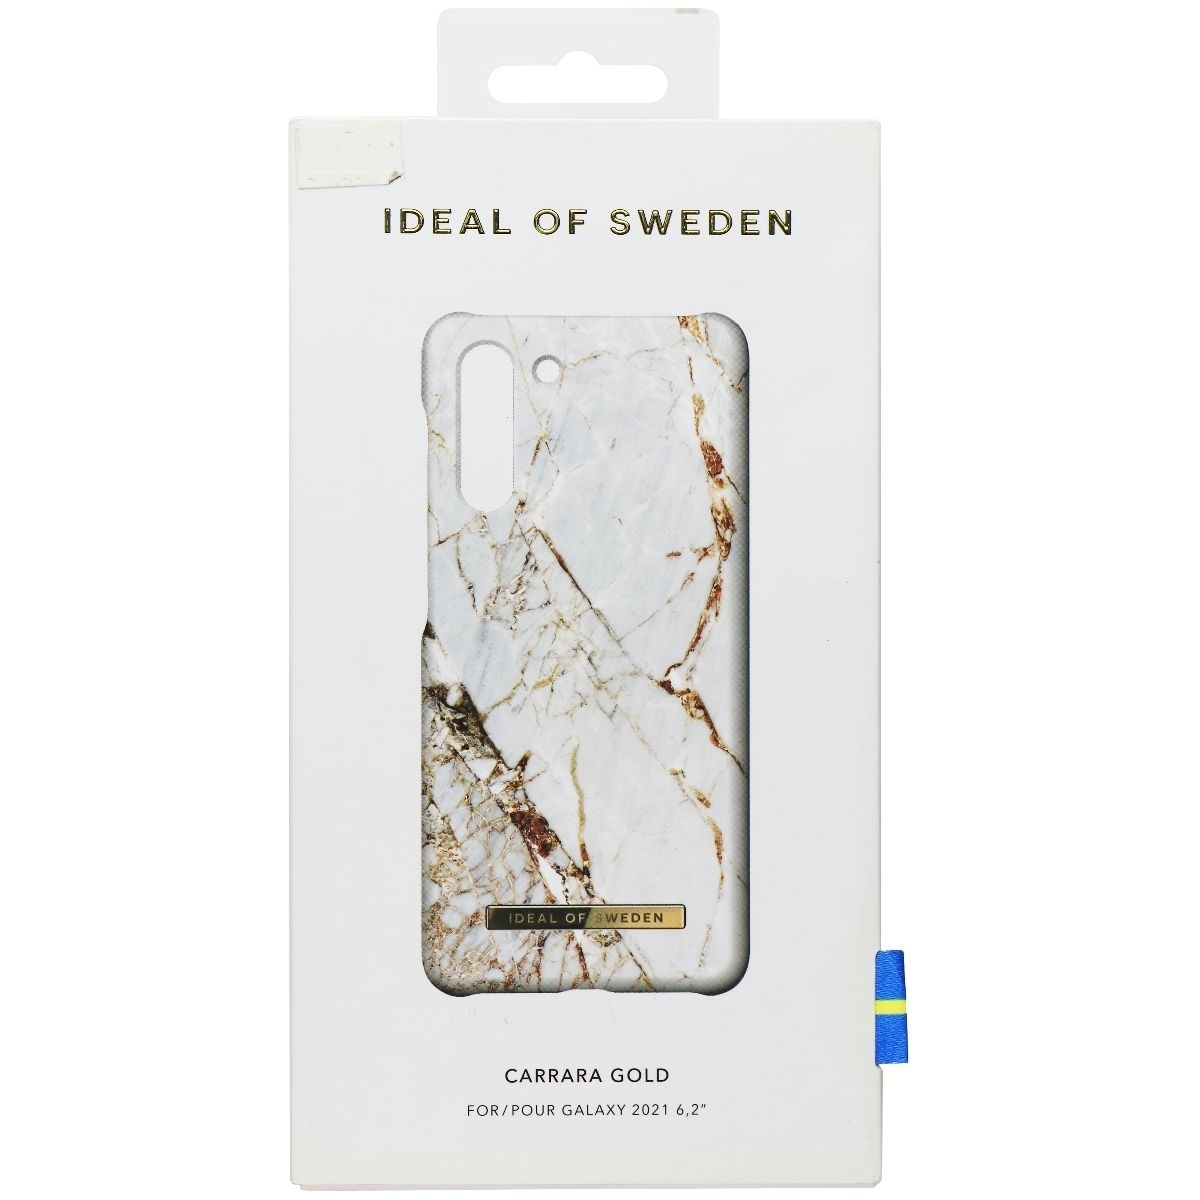 IDeal Of Sweden Printed Hard Case For Samsung Galaxy S21 - Carrara Gold (Refurbished)